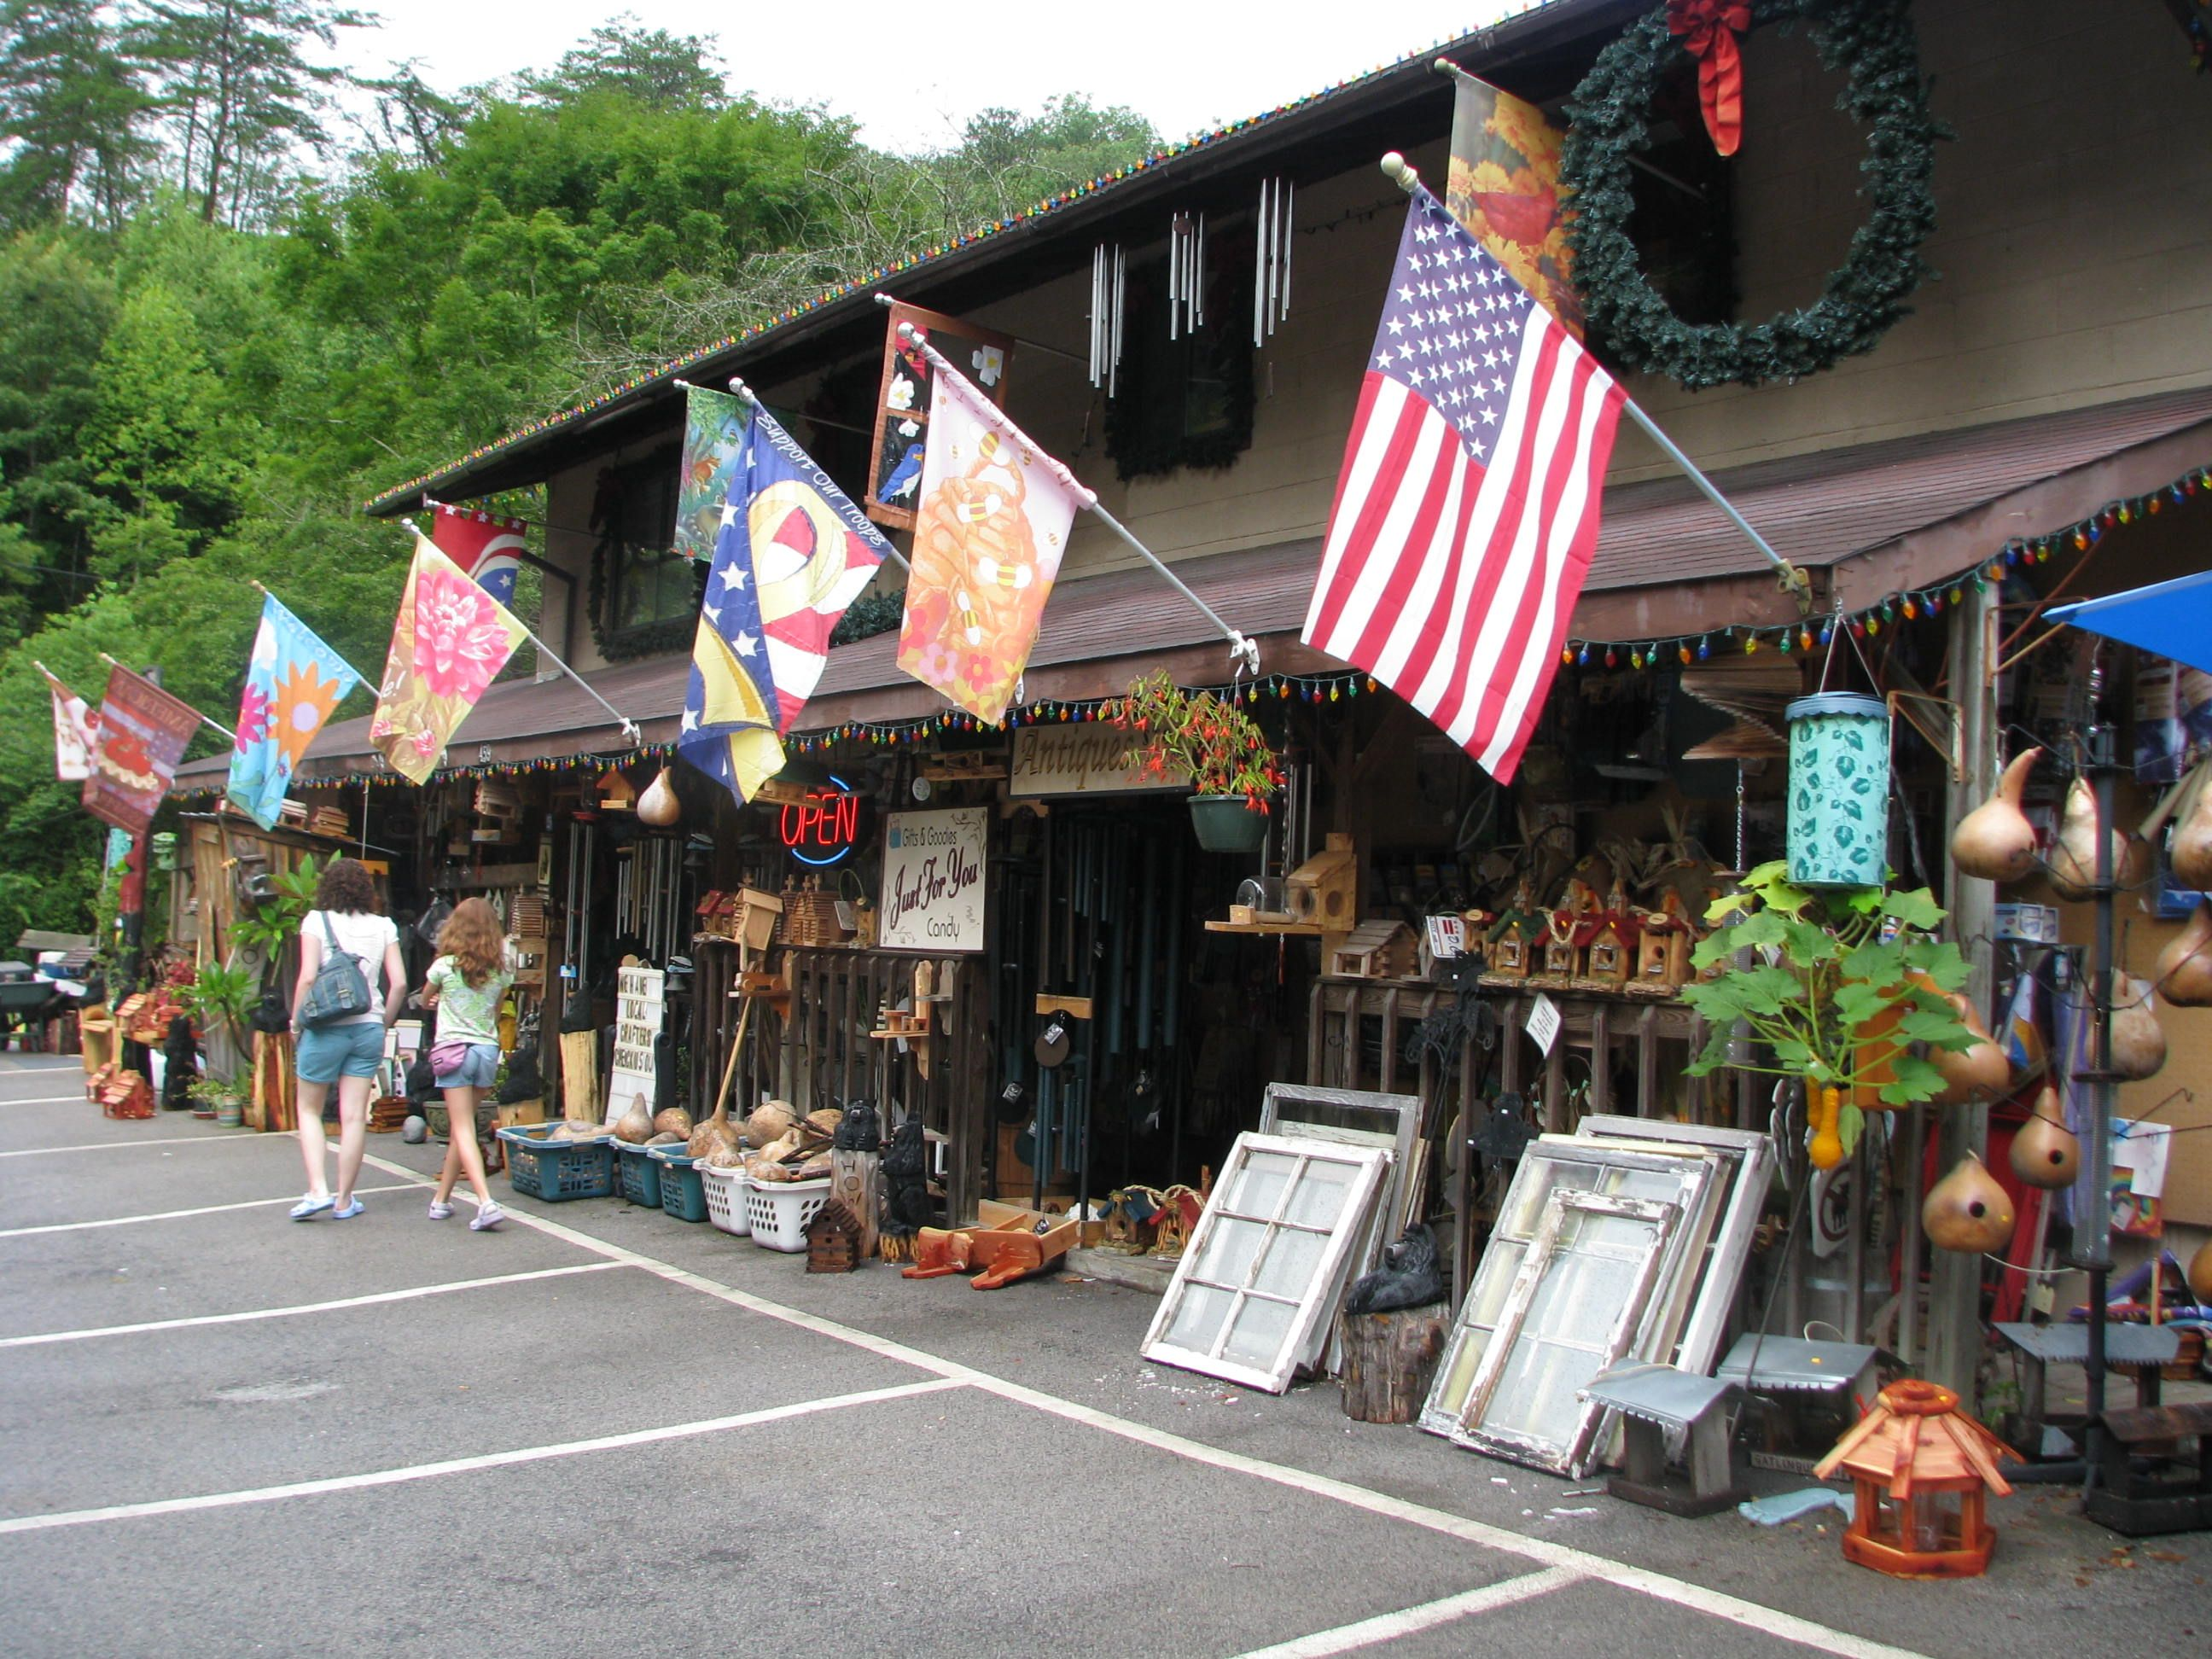 Smoky Mountain Arts and Crafts Community